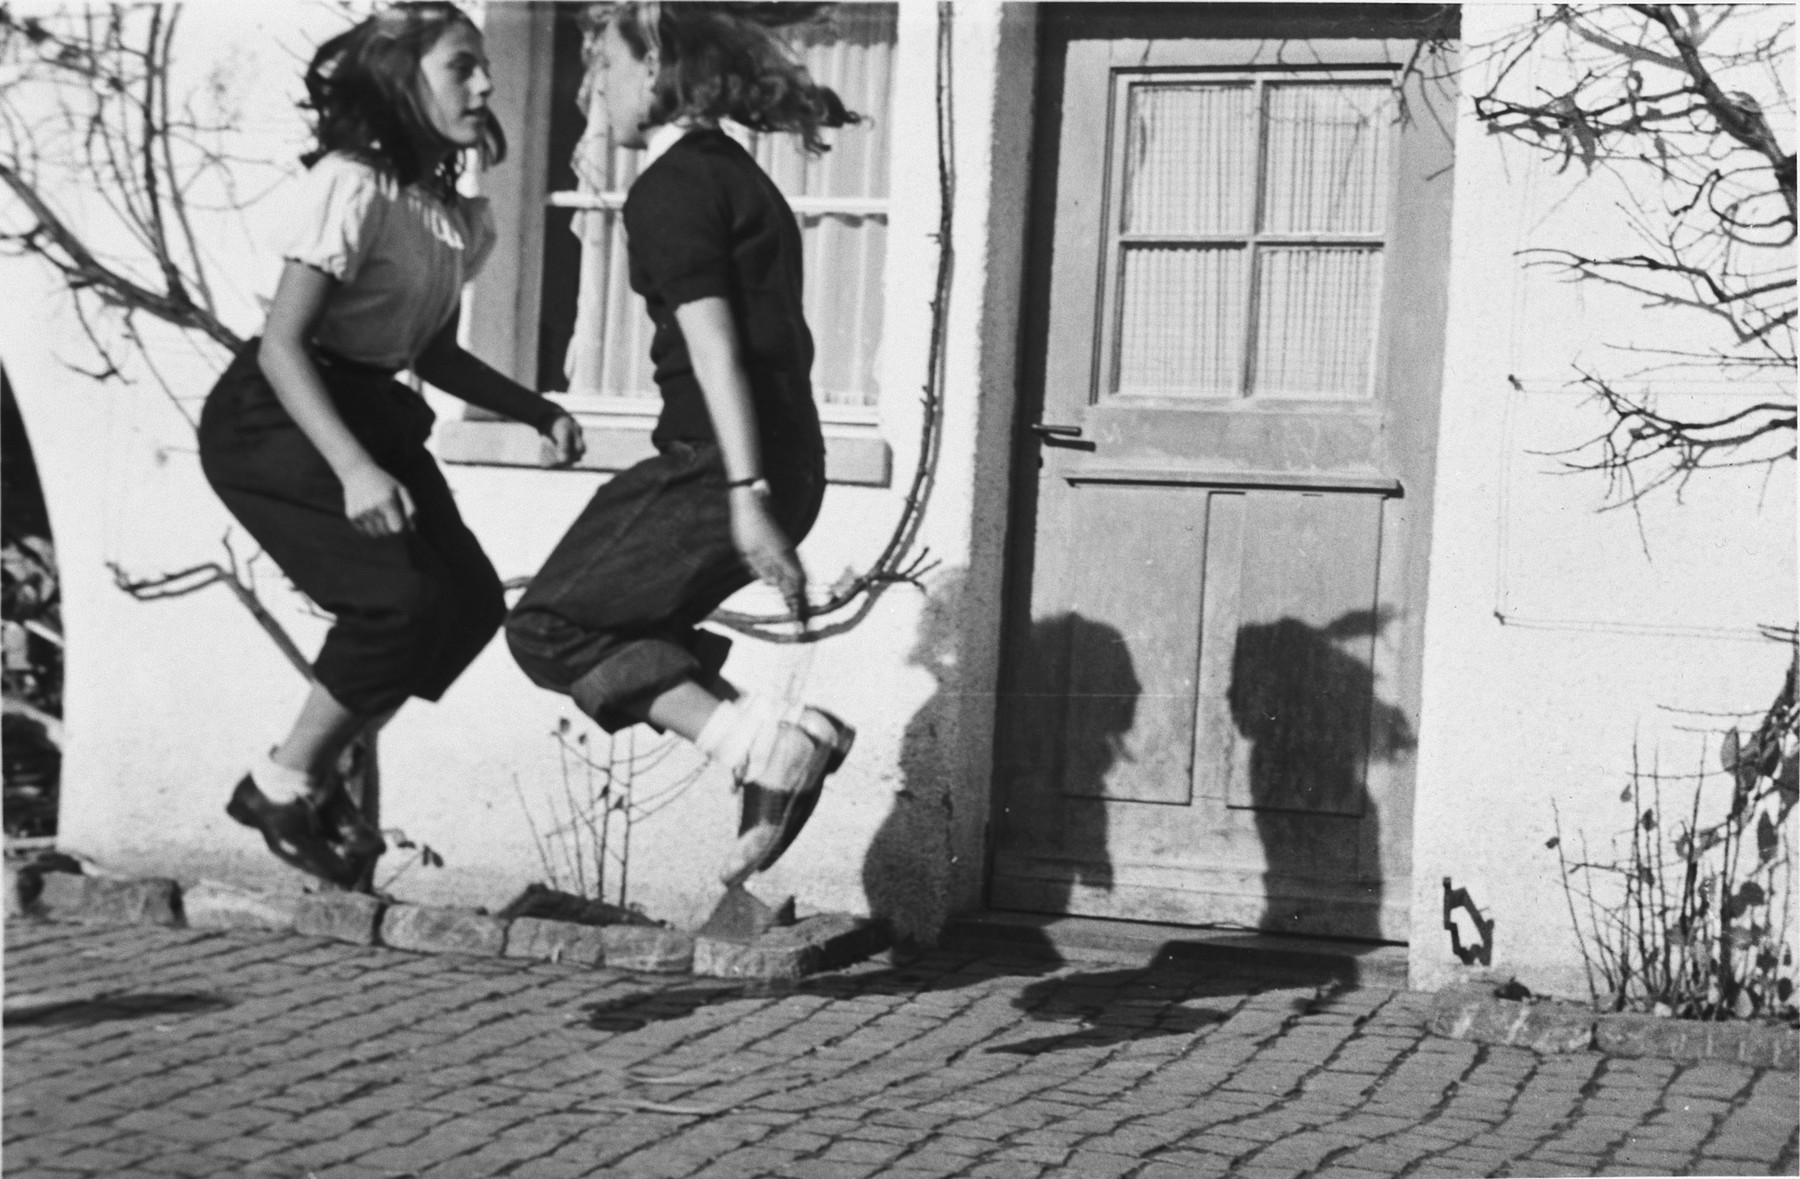 Two girls skip rope outside an international boarding school in Switzerland.

The two girls are from Switzerland and the United States.